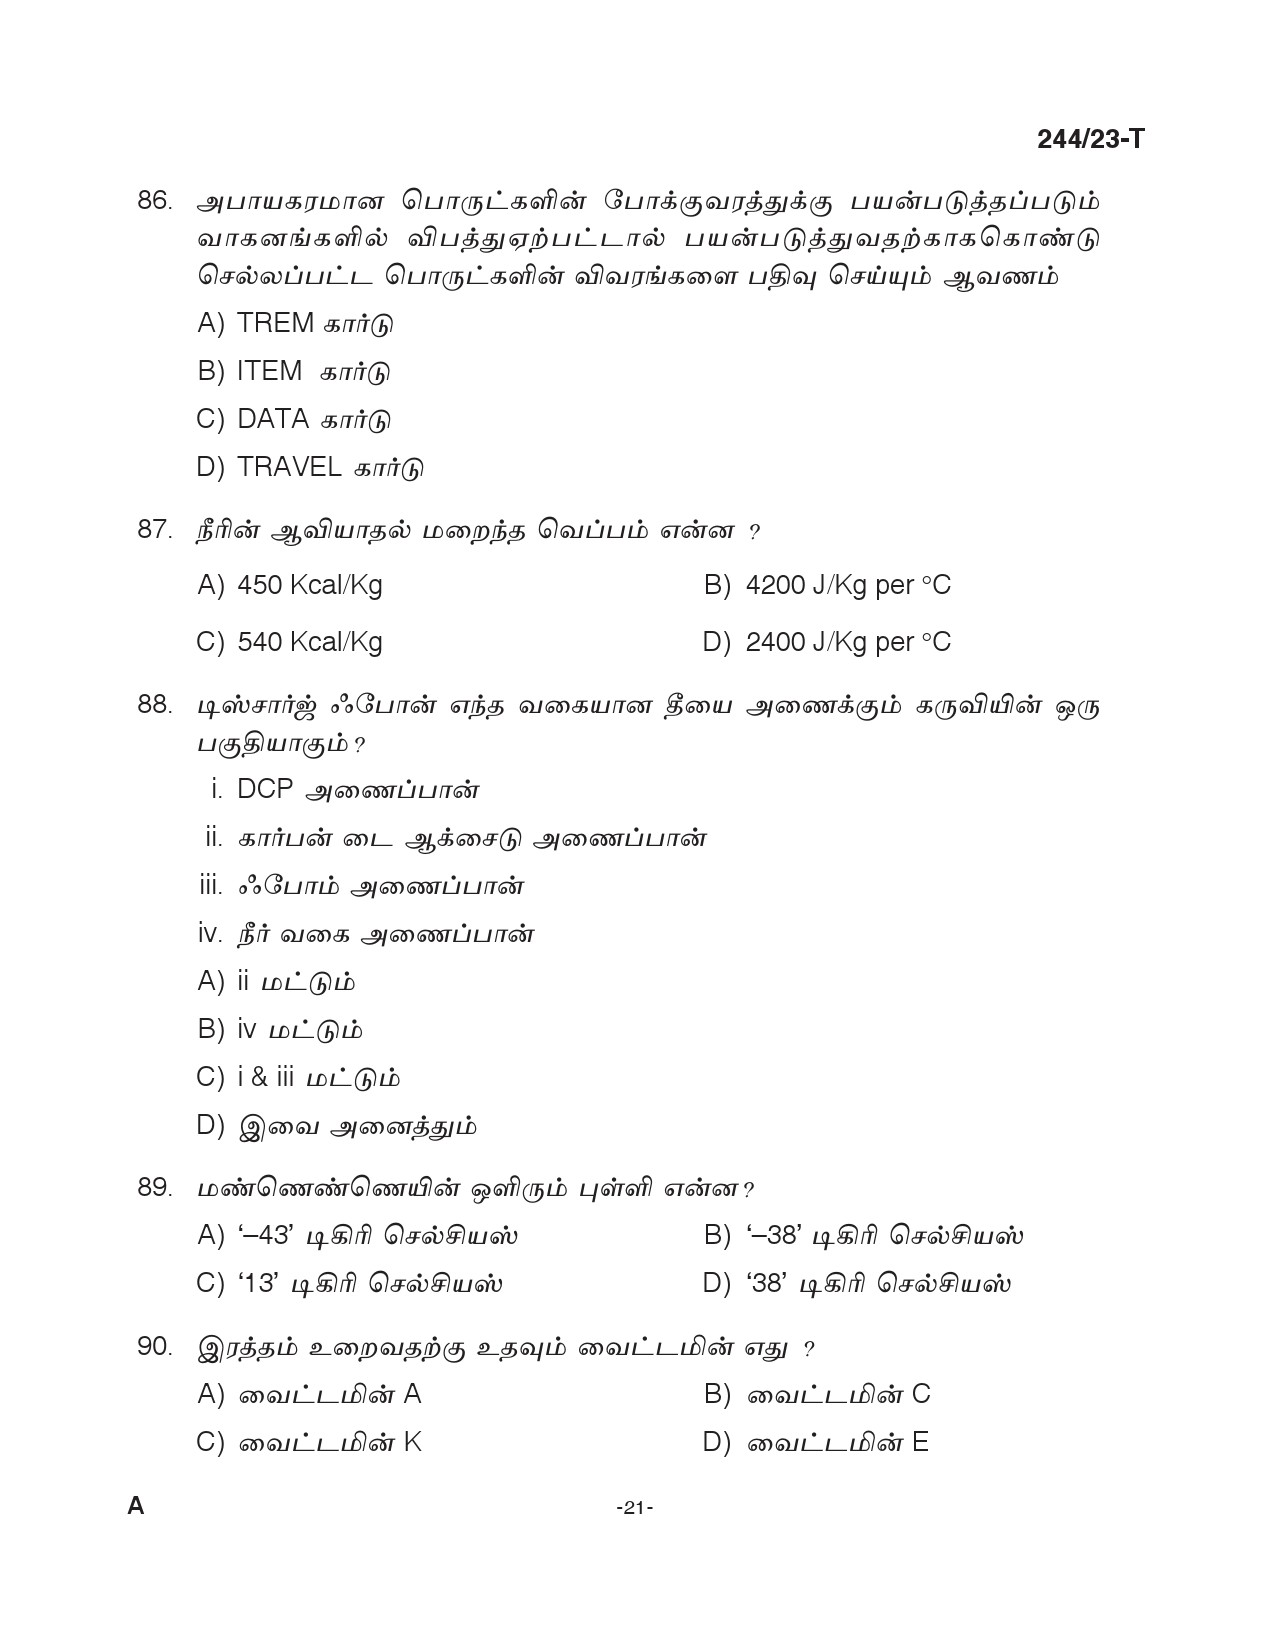 KPSC Fire and Rescue Officer Trainee Tamil Exam 2023 Code 2442023 T 20